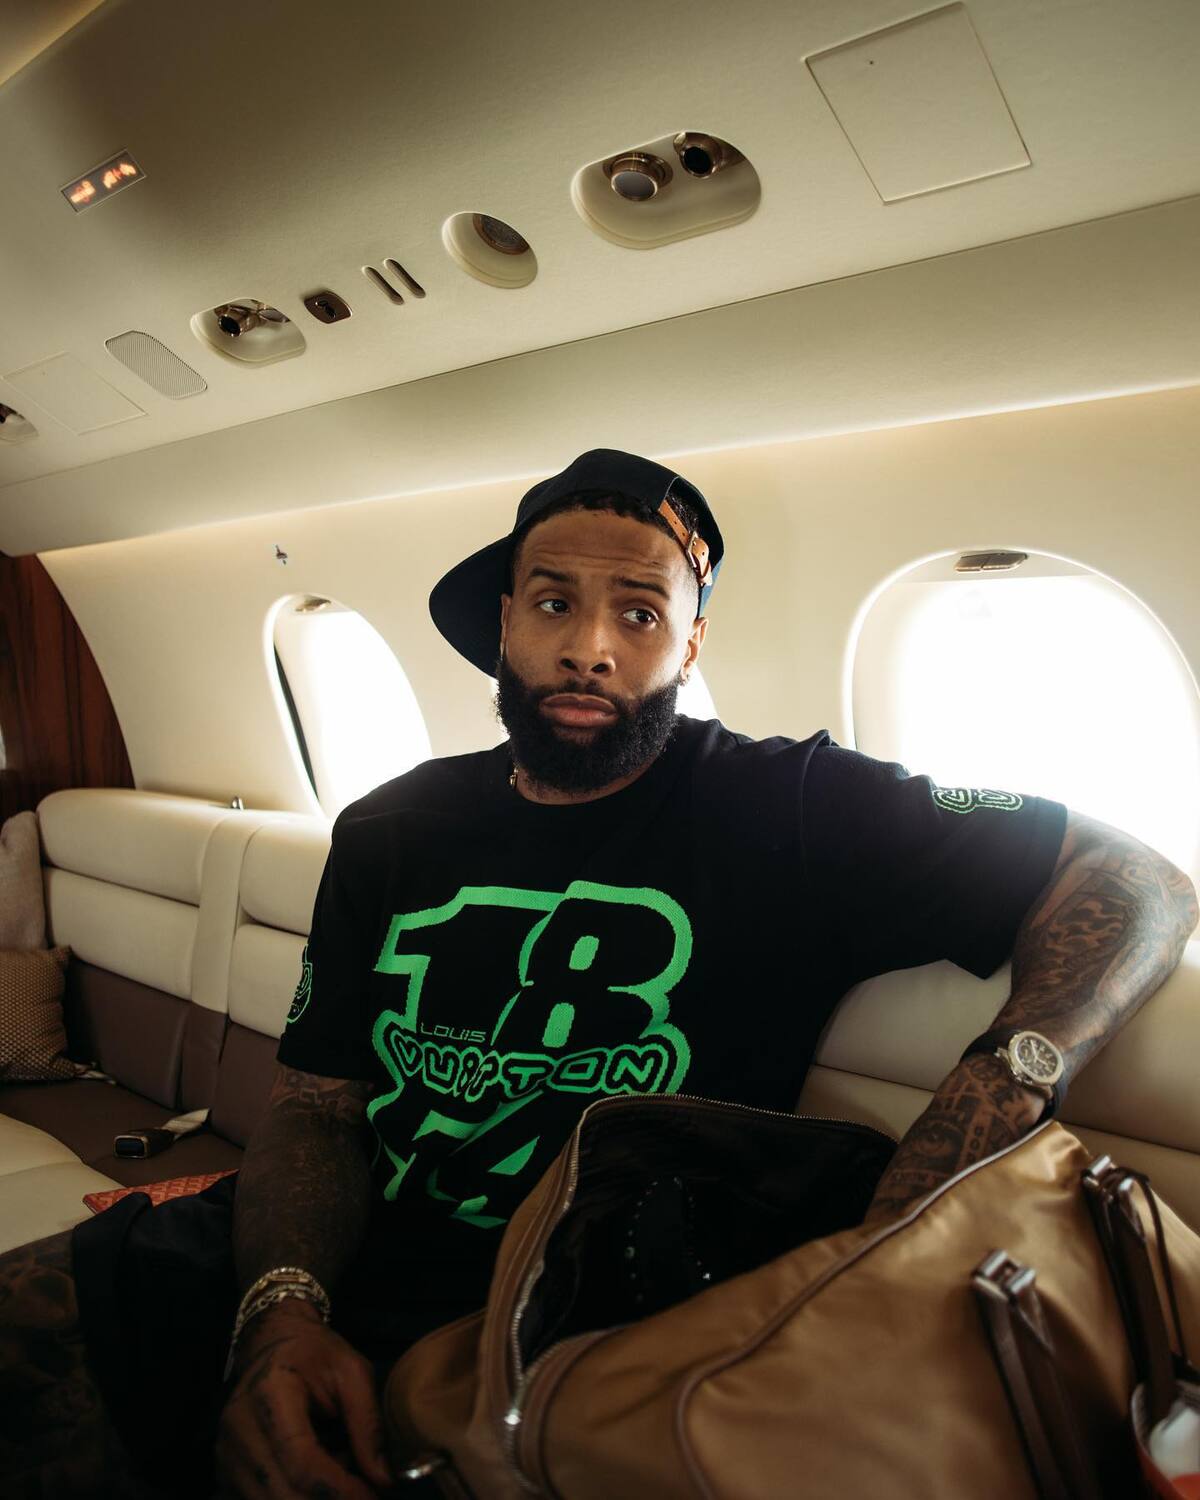 Odell Beckham Jr. Wears Louis Vuitton x Supreme and Off - There